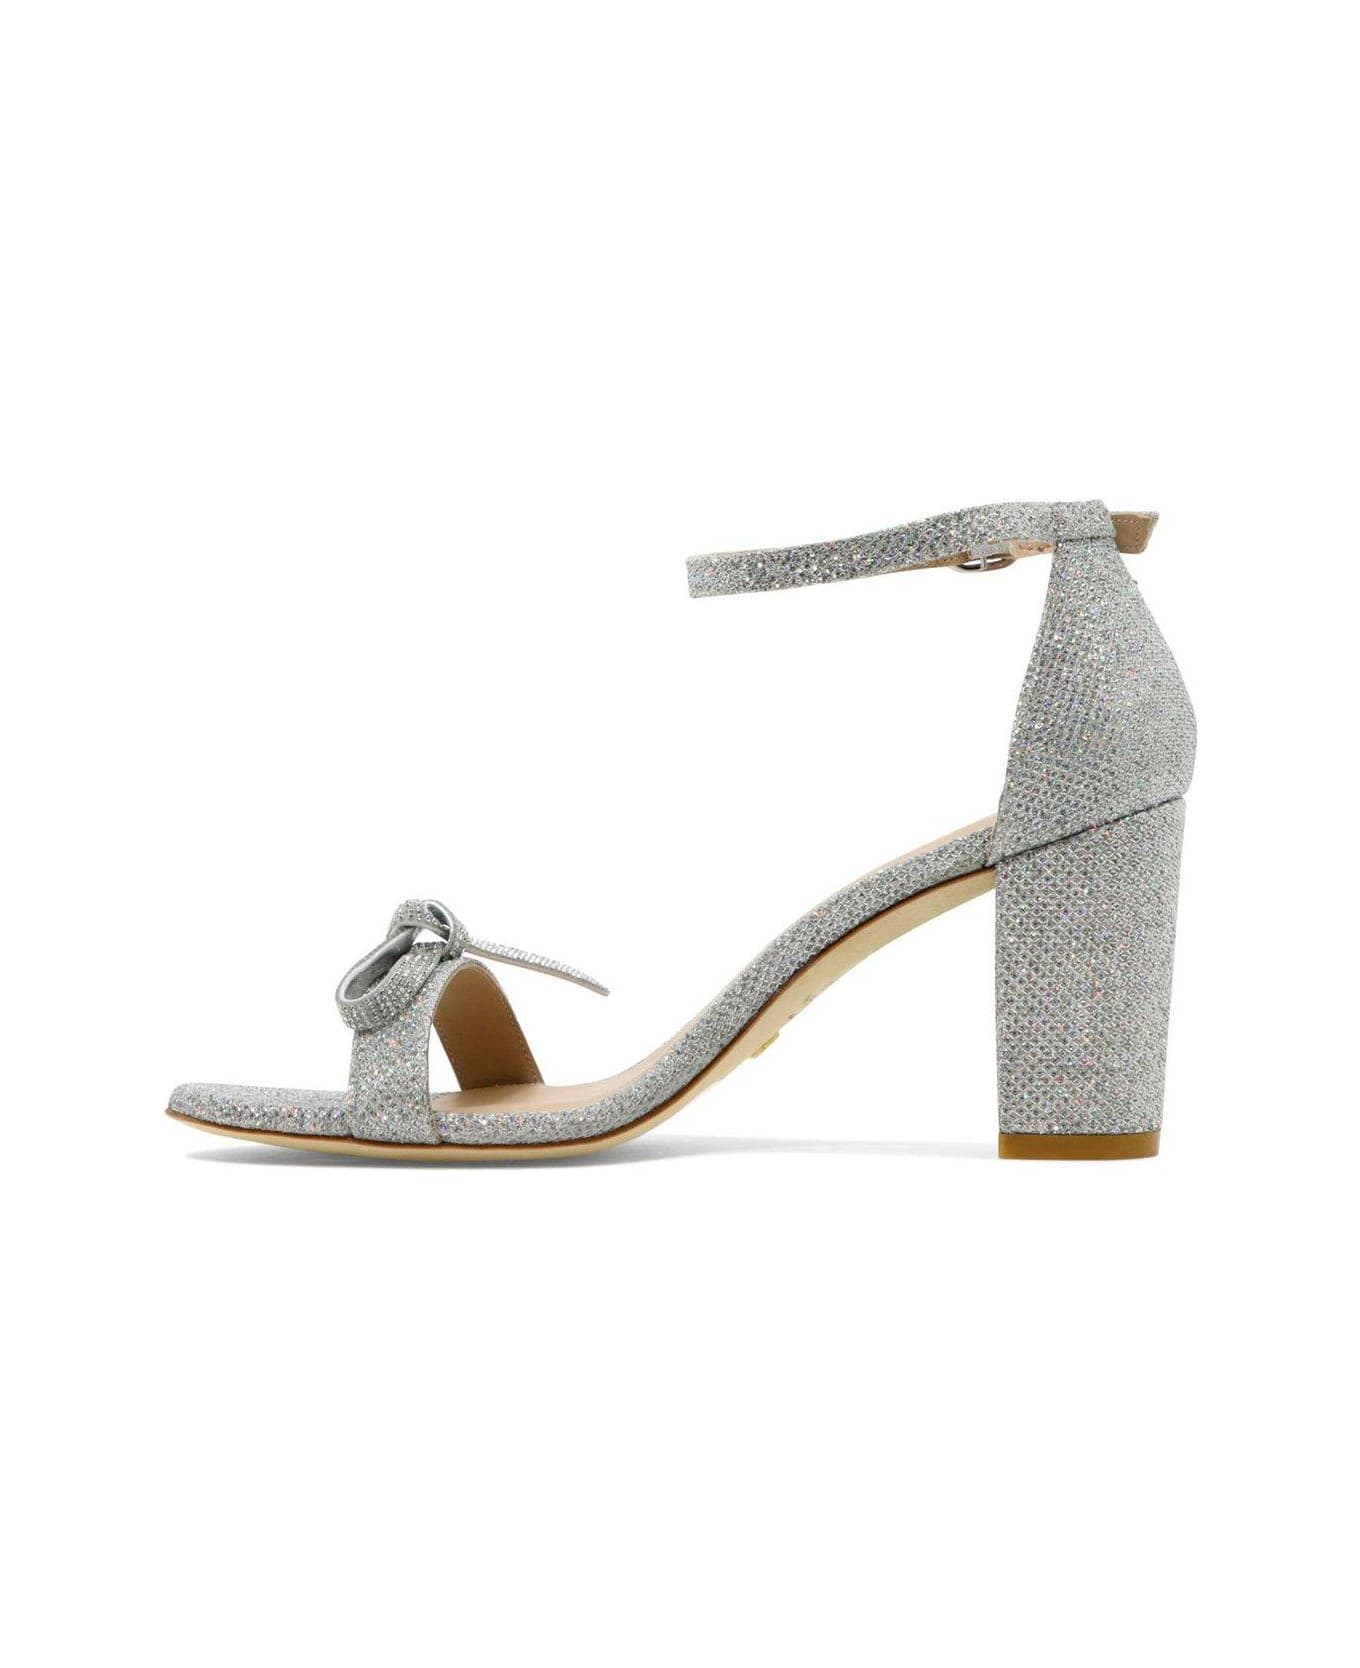 Stuart Weitzman Nearlynude Bow Strap Heeled Sandals - Crystal Silver